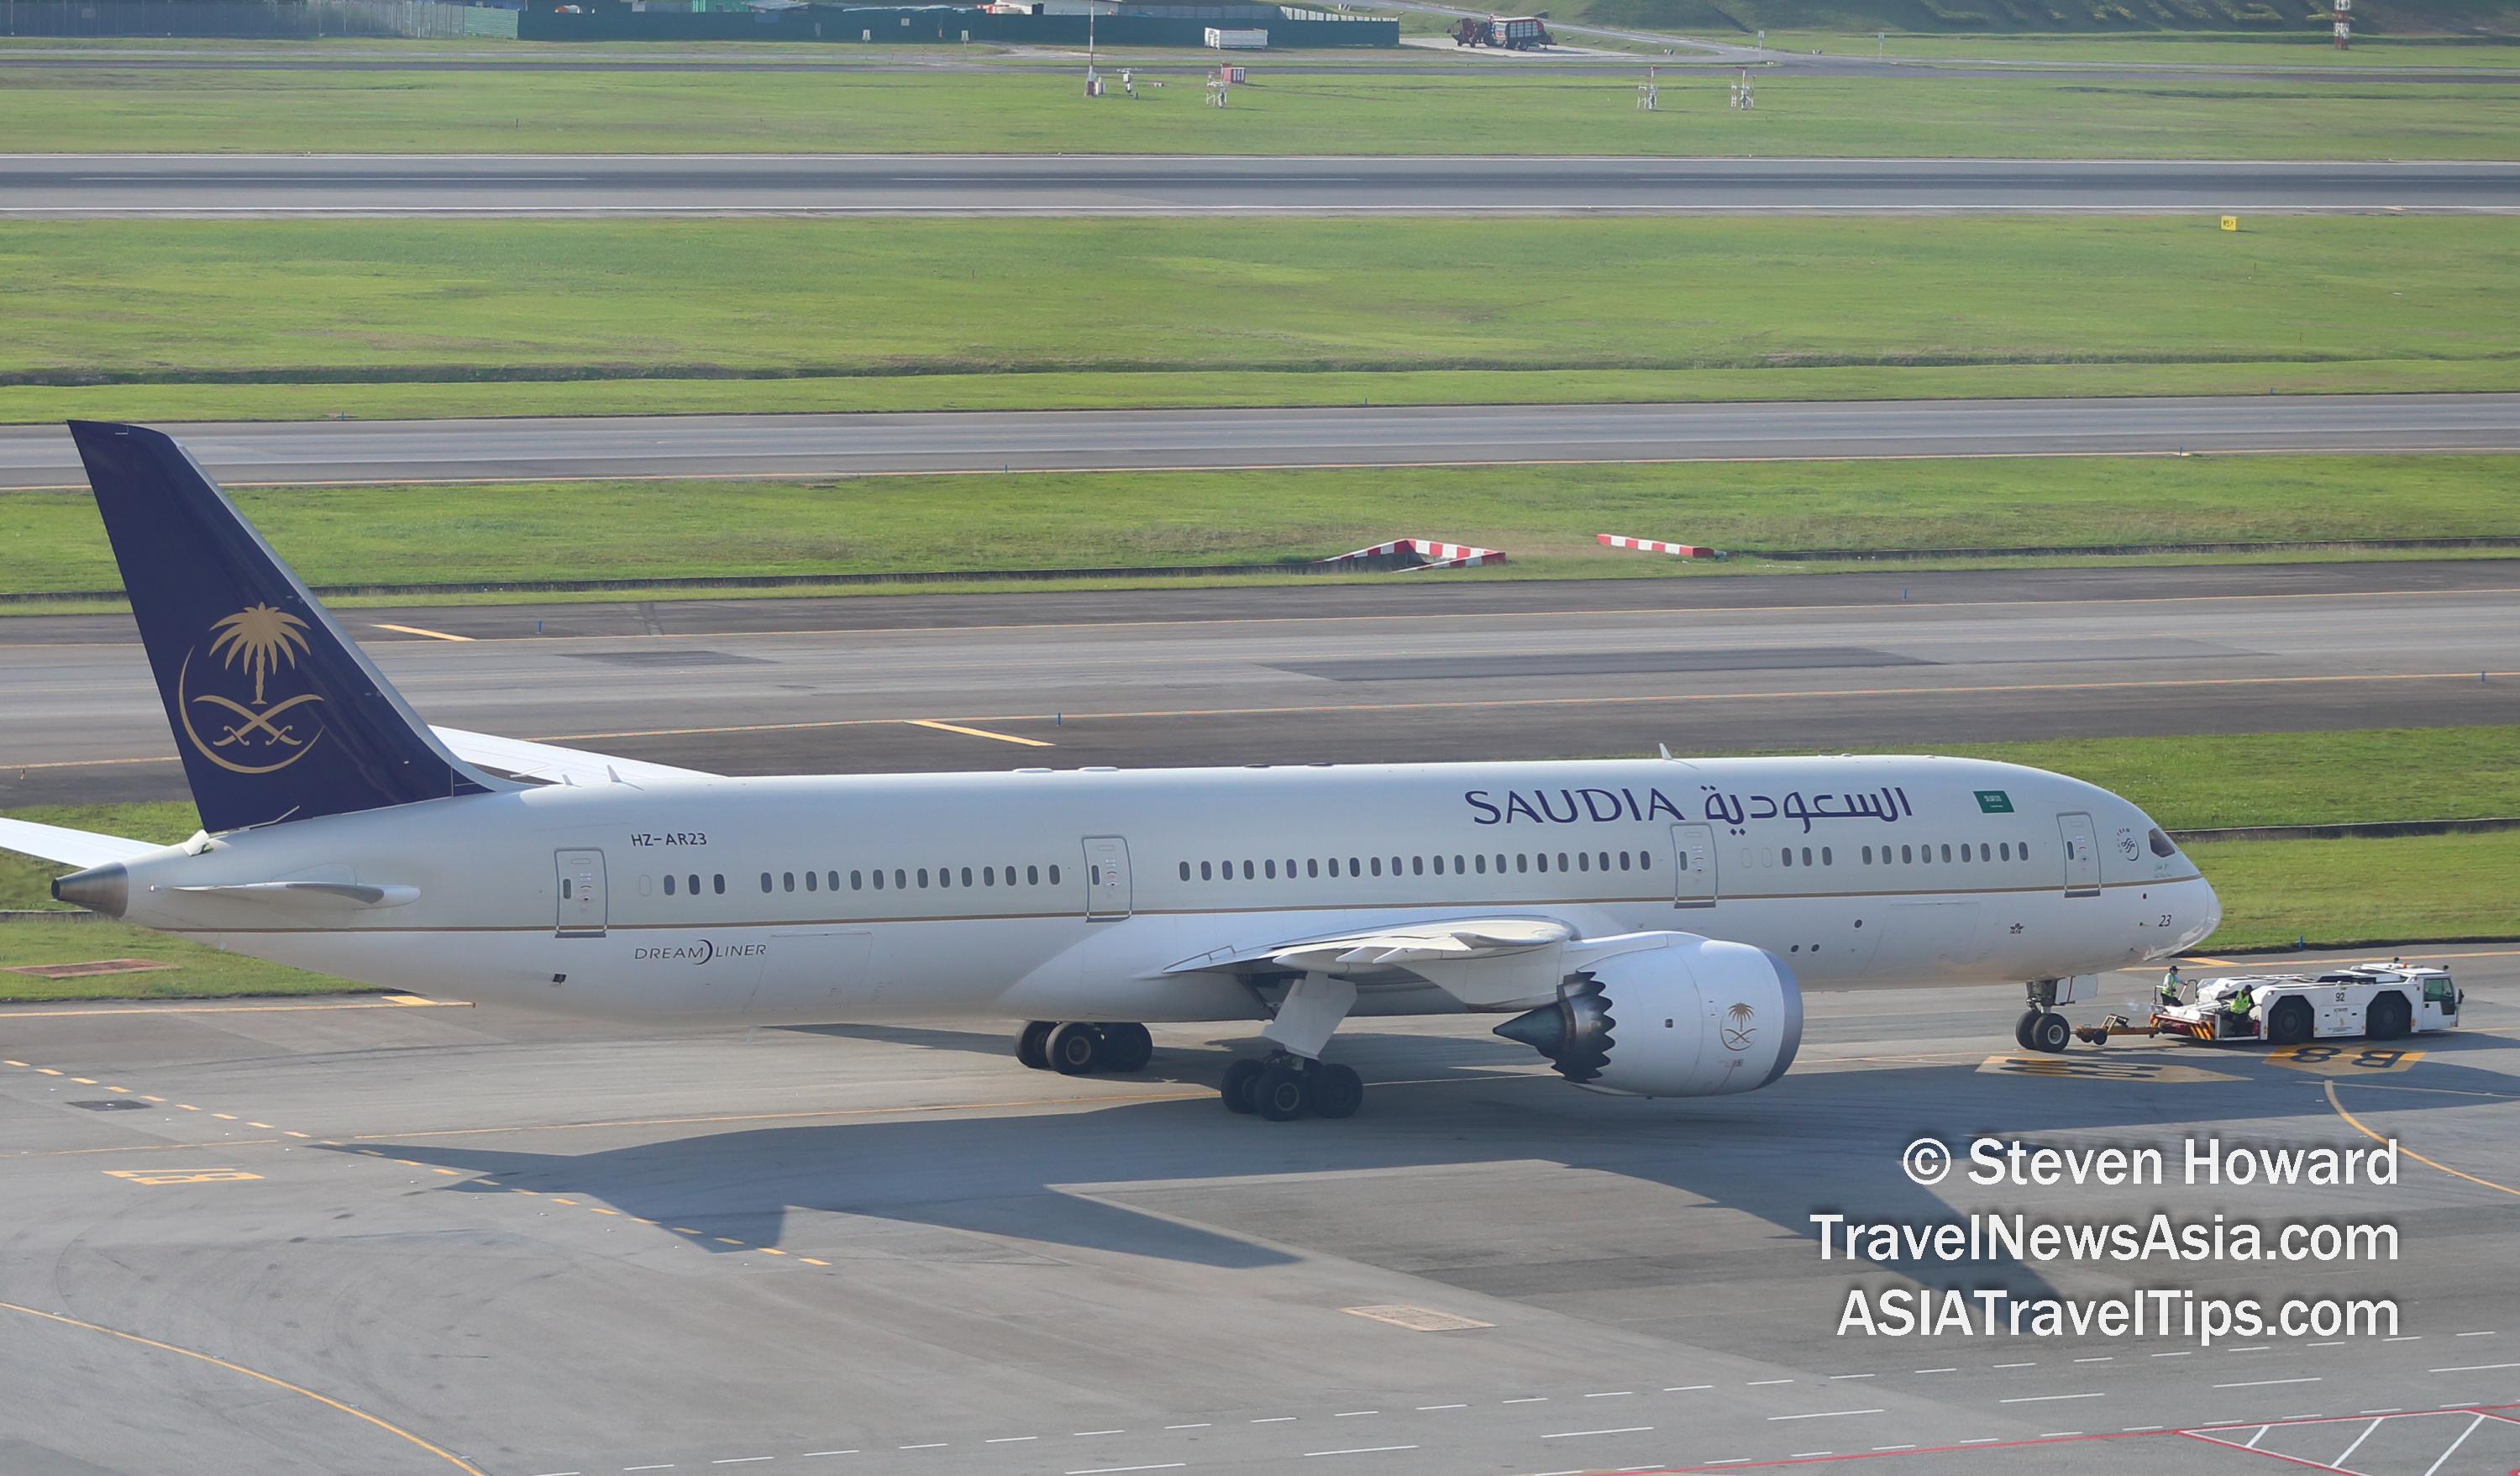 Saudia Boeing 787-9 Dreamliner reg: HZ-AR23. Picture by Steven Howard of TravelNewsAsia.com. Click to enlarge.